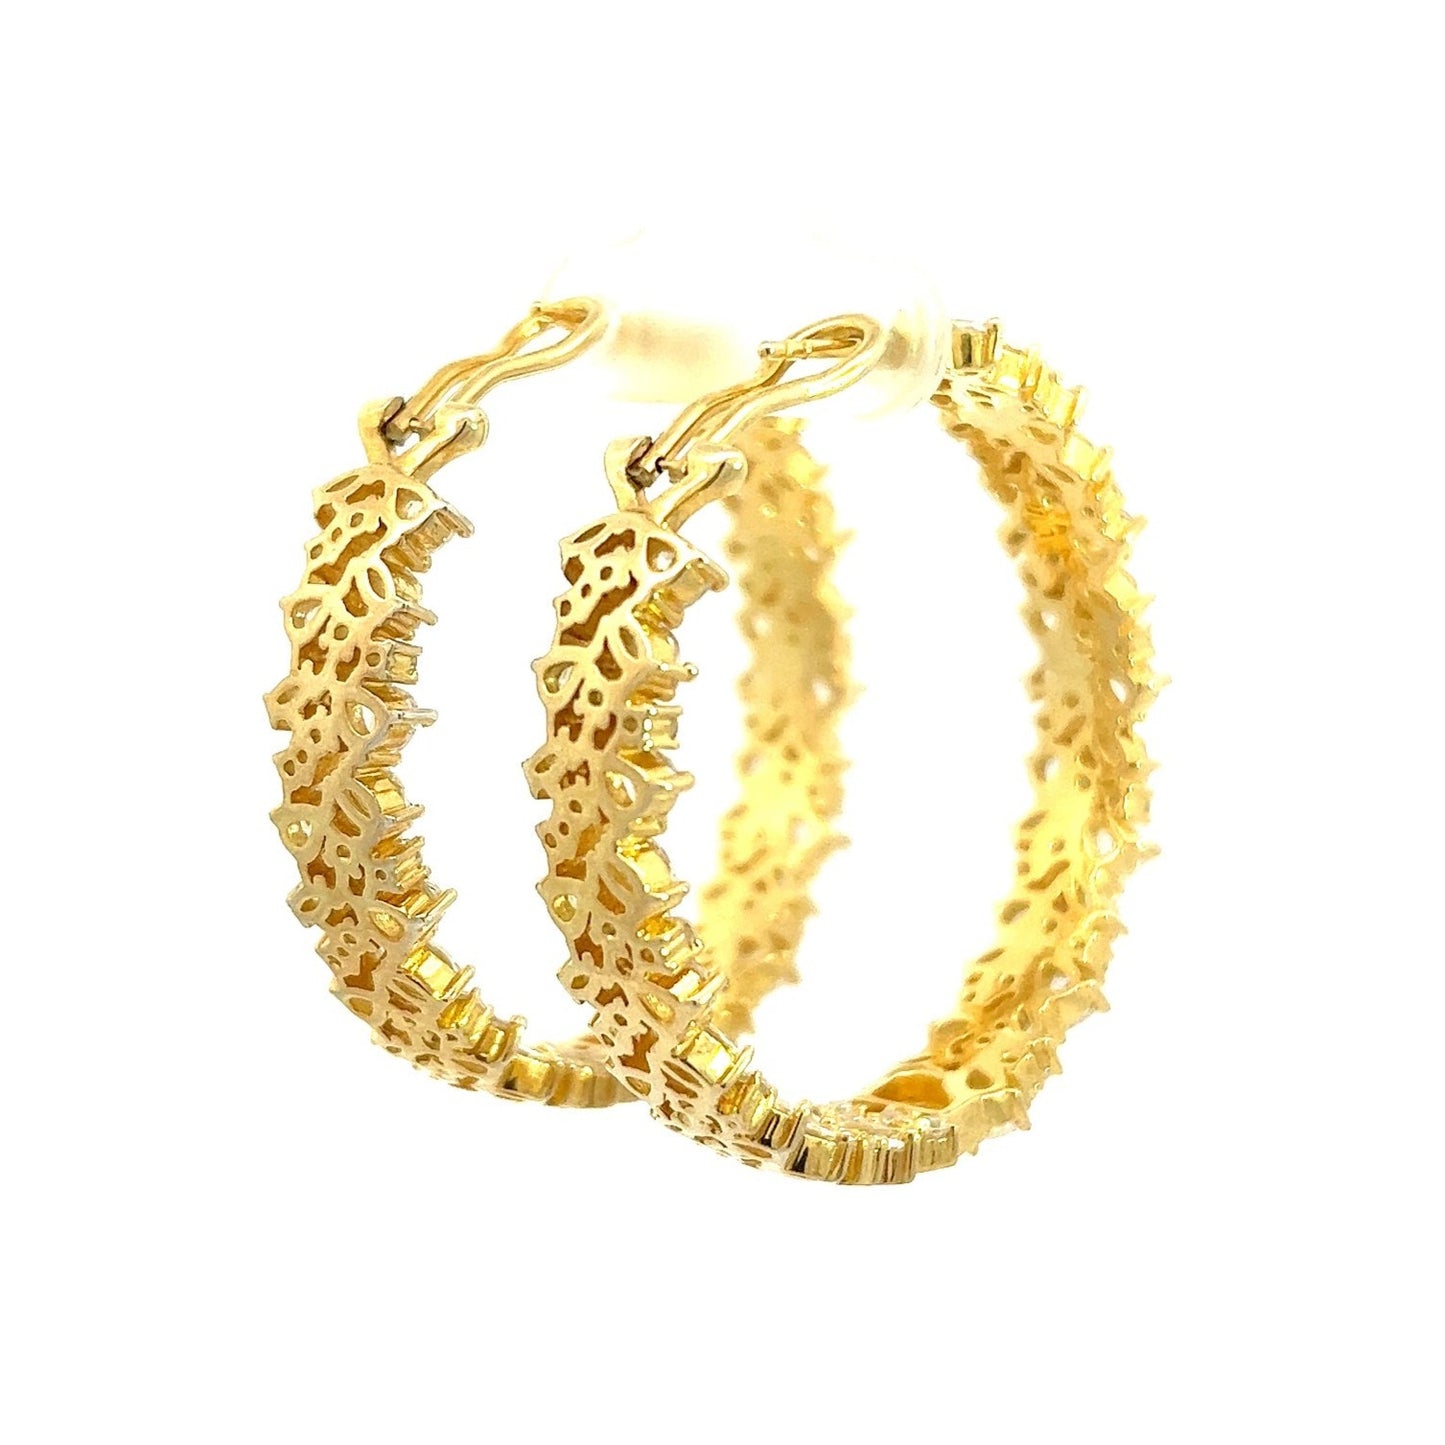 Gold Radiance CZ Crystal Hoop Earrings - Born To Glam